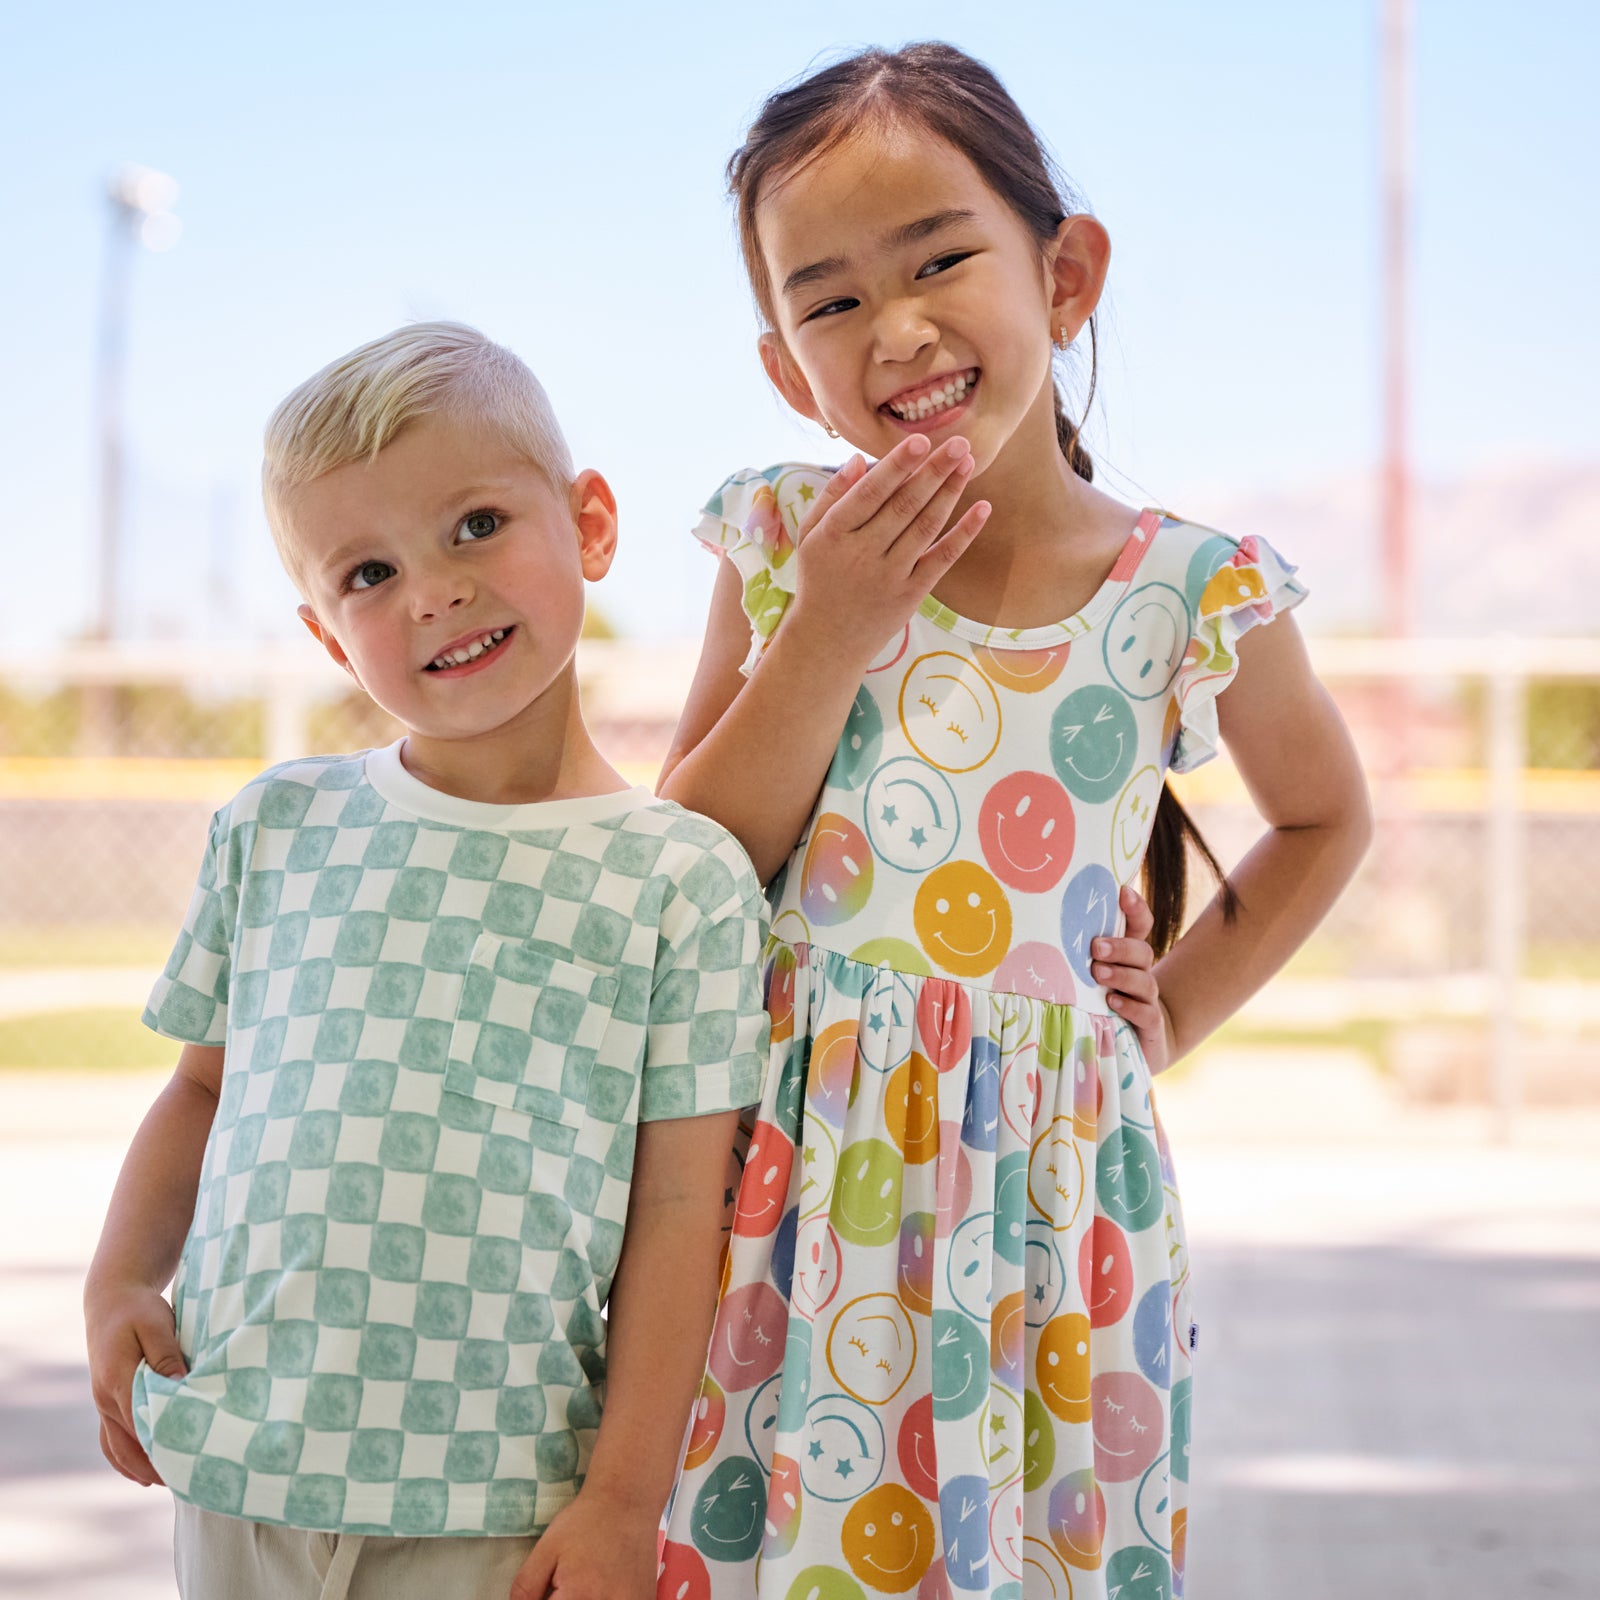 girl wearing positive vibes twirl dress standing with boy wearing watercolor checks tee shirt